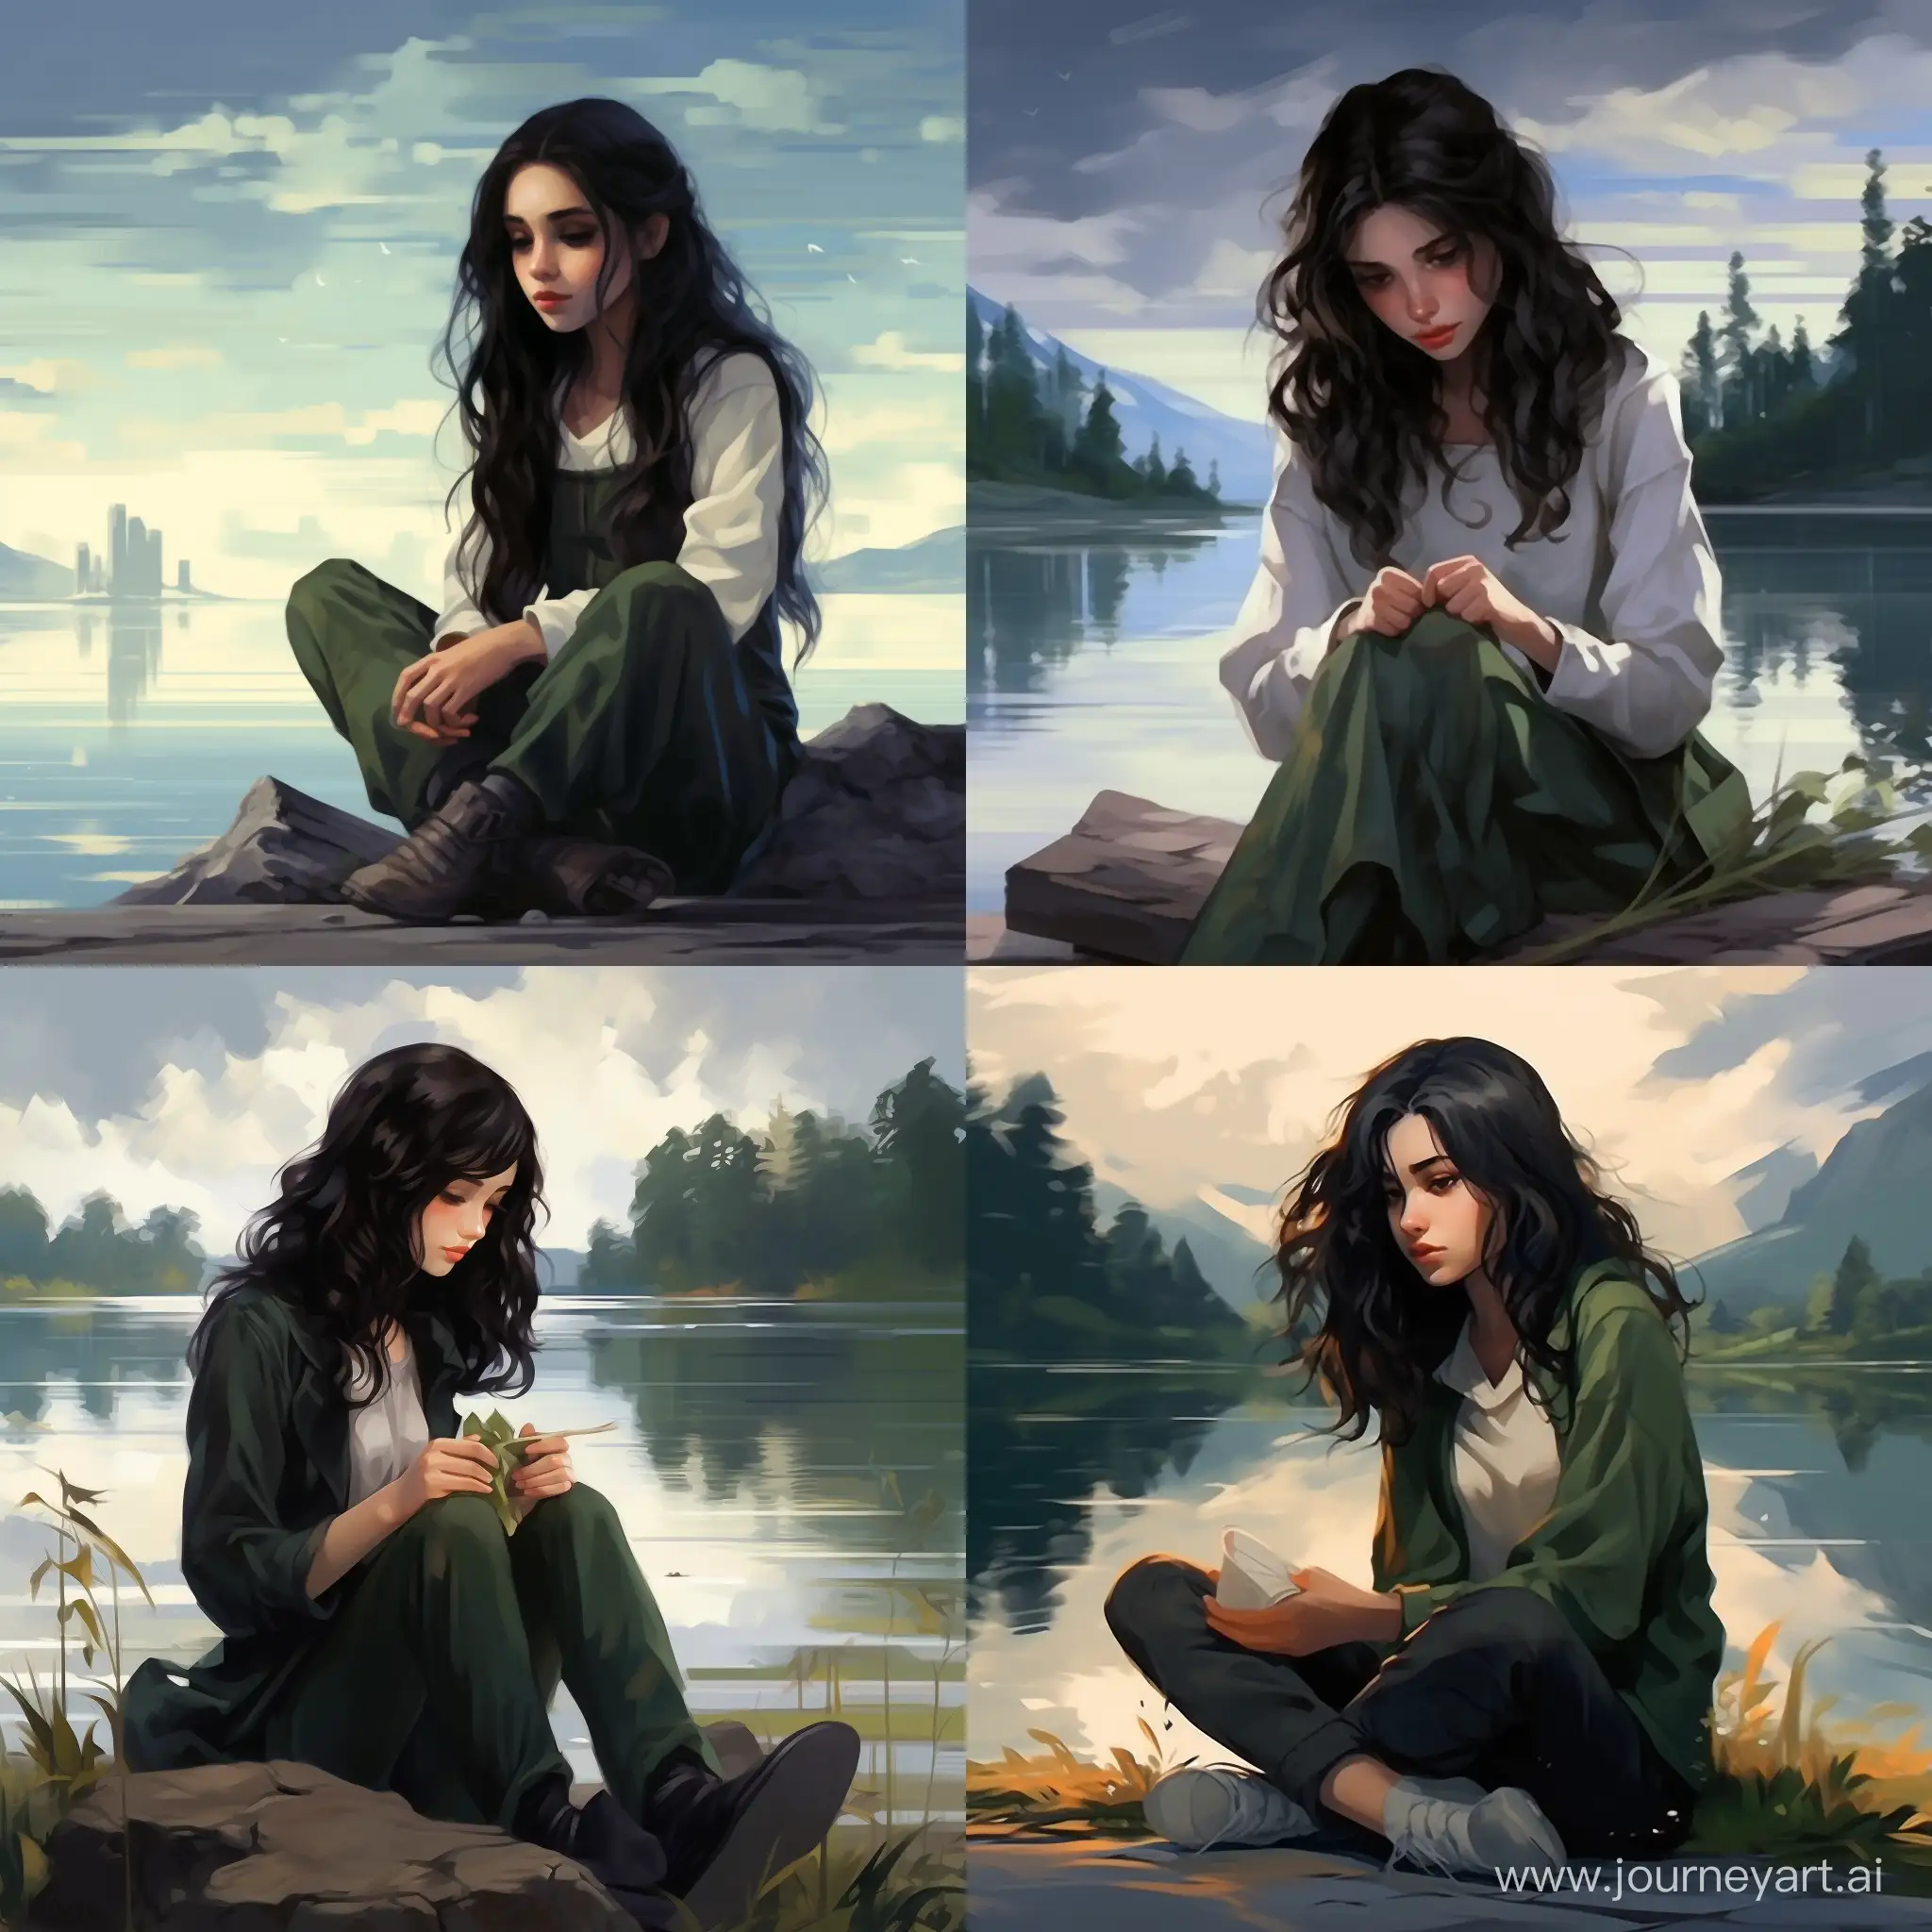 Melancholic-Slytherin-Teen-by-the-Lake-DarkHaired-Girl-with-Lighter-at-Hogwarts